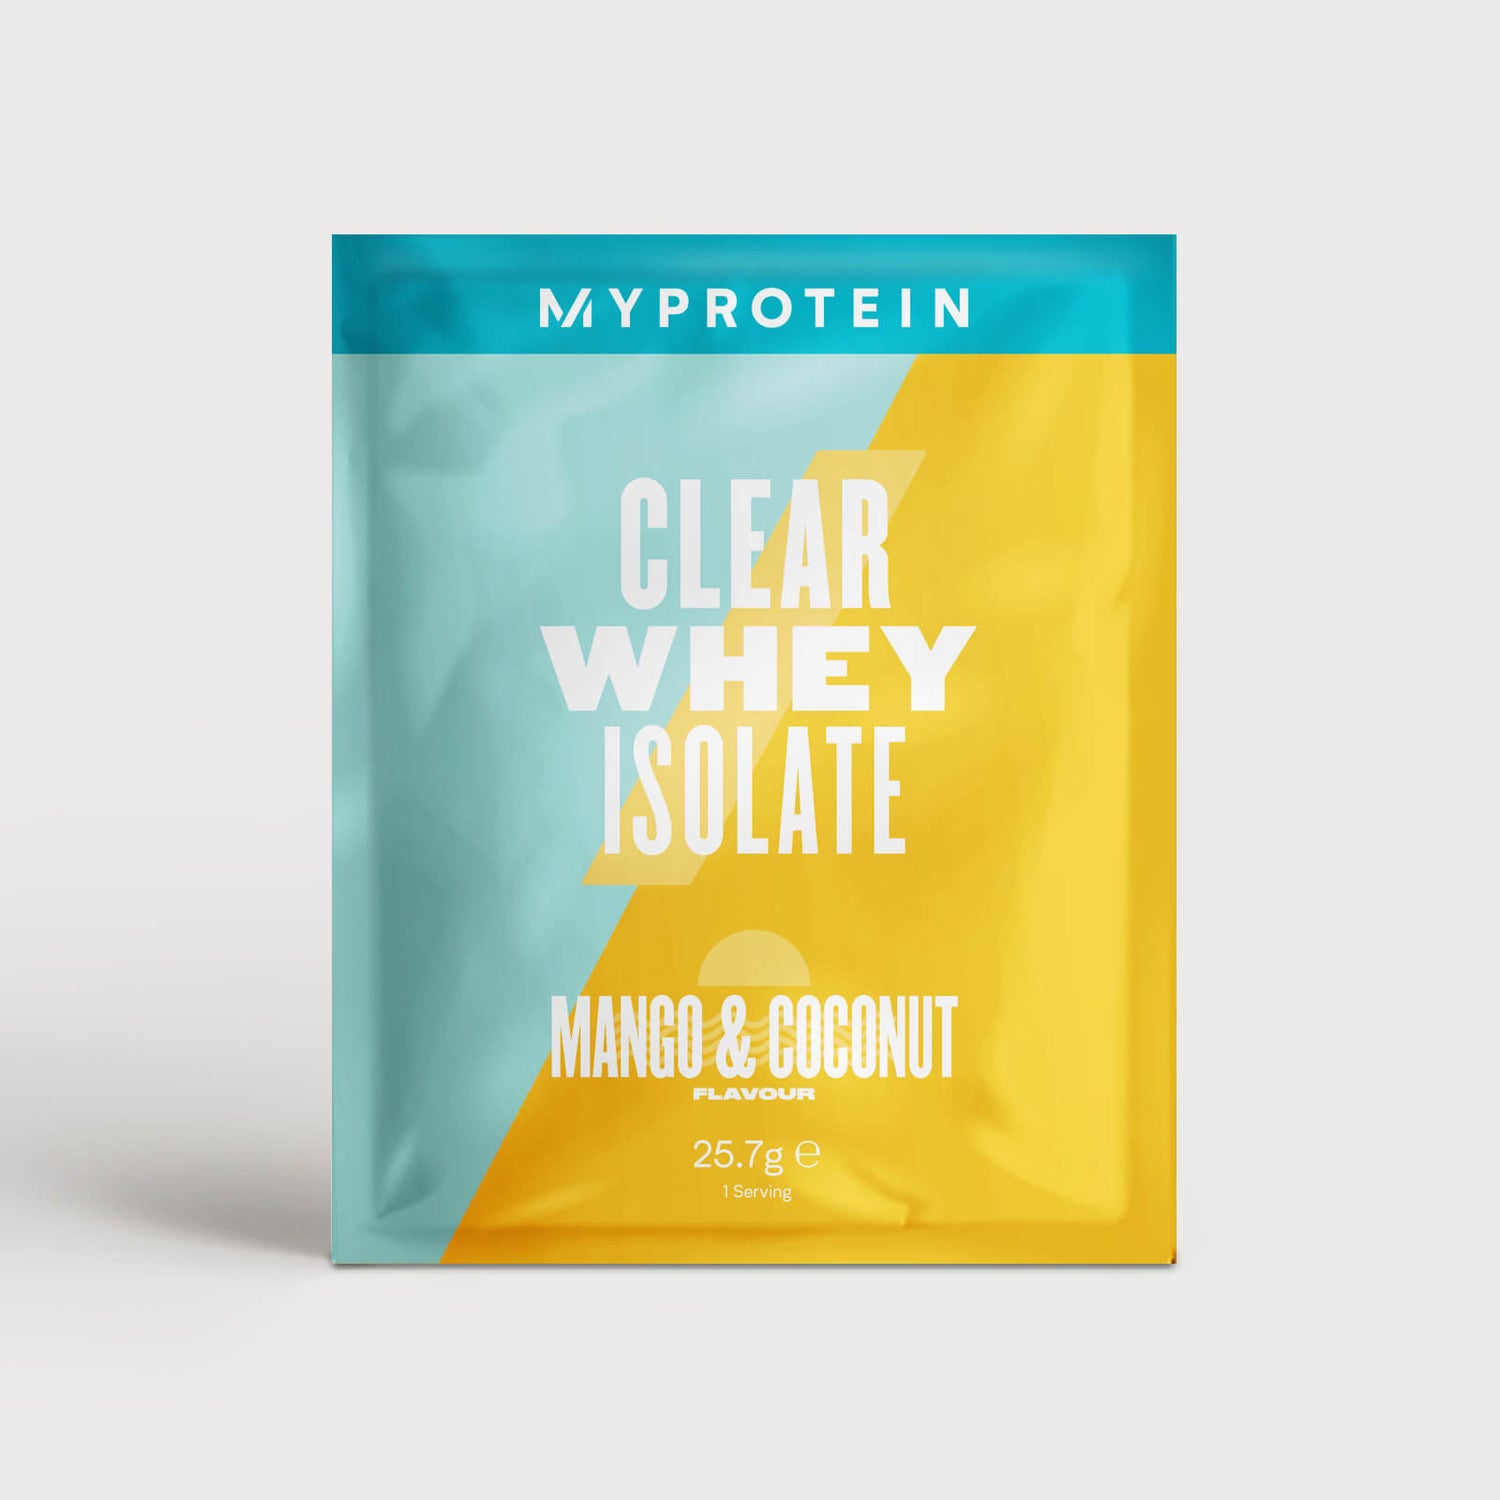 Myprotein Clear Whey Isolate (Sample) - 1servings - Mango & Coconut 